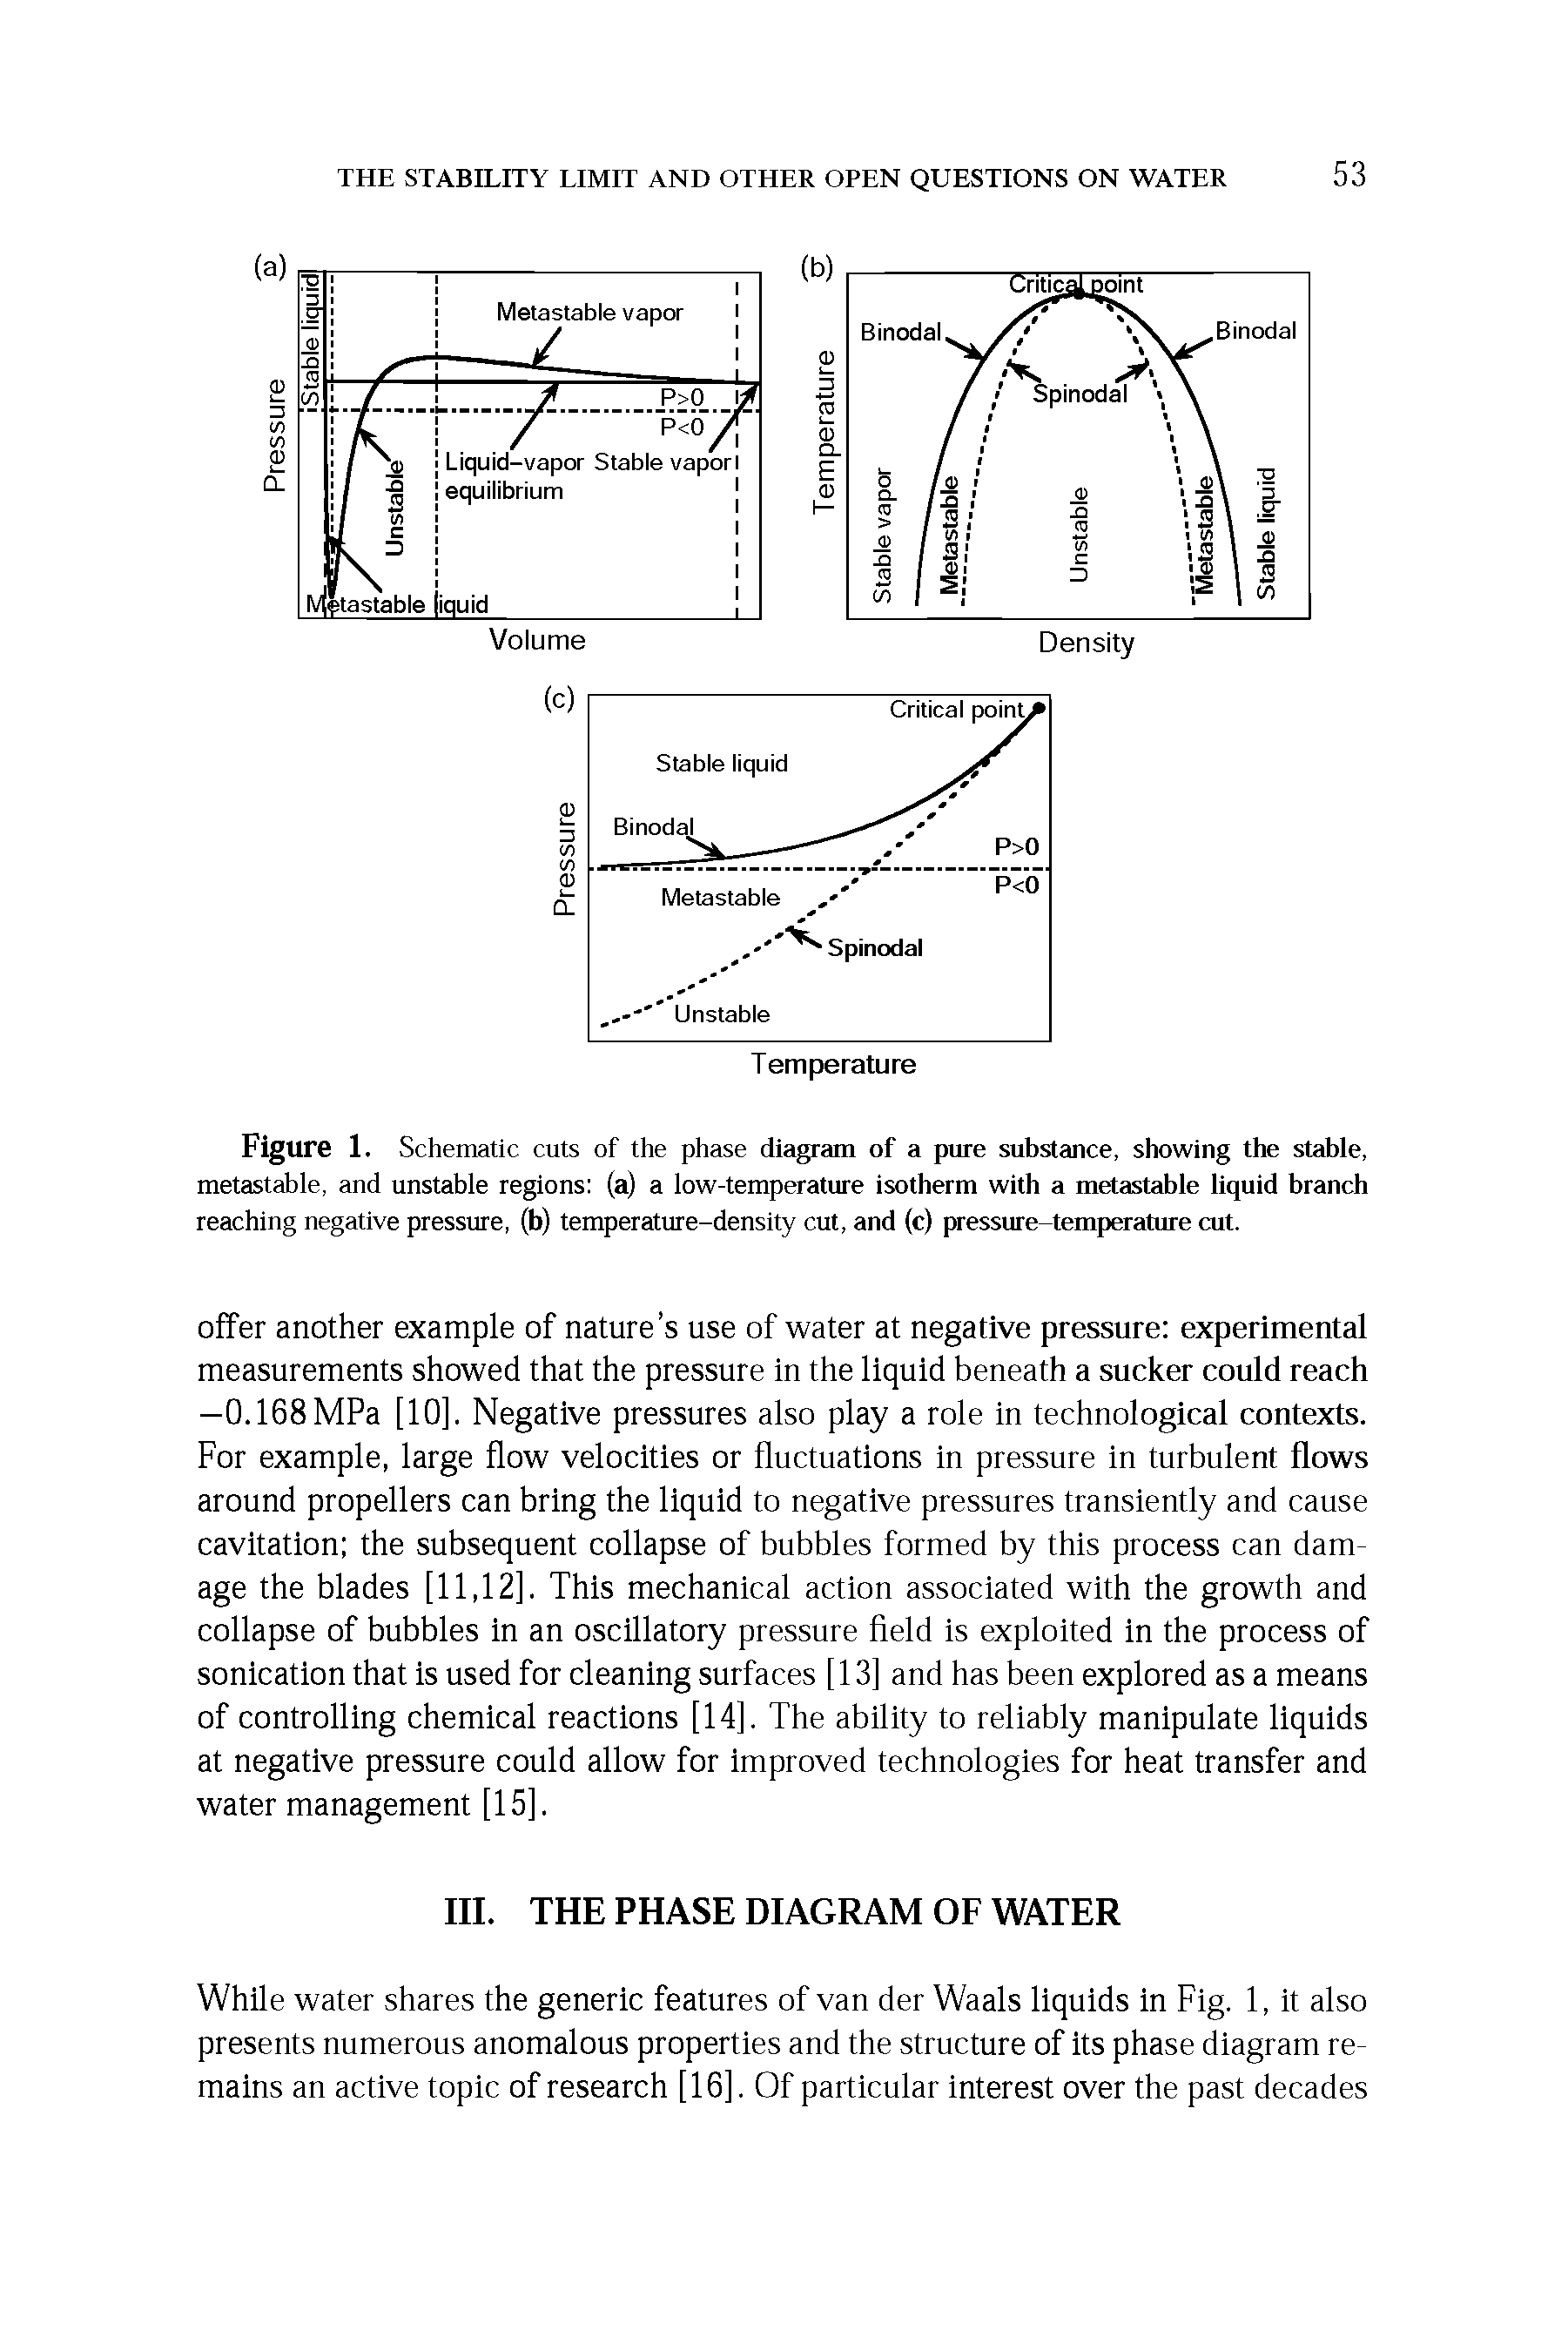 Figure 1. Schematic cuts of the phase diagram of a pure substance, showing the stable, metastable, and unstable regions (a) a low-temperature isotherm with a metastable liquid branch reaching negative pressure, (b) temperature-density cut, and (c) pressure-temperature cut.